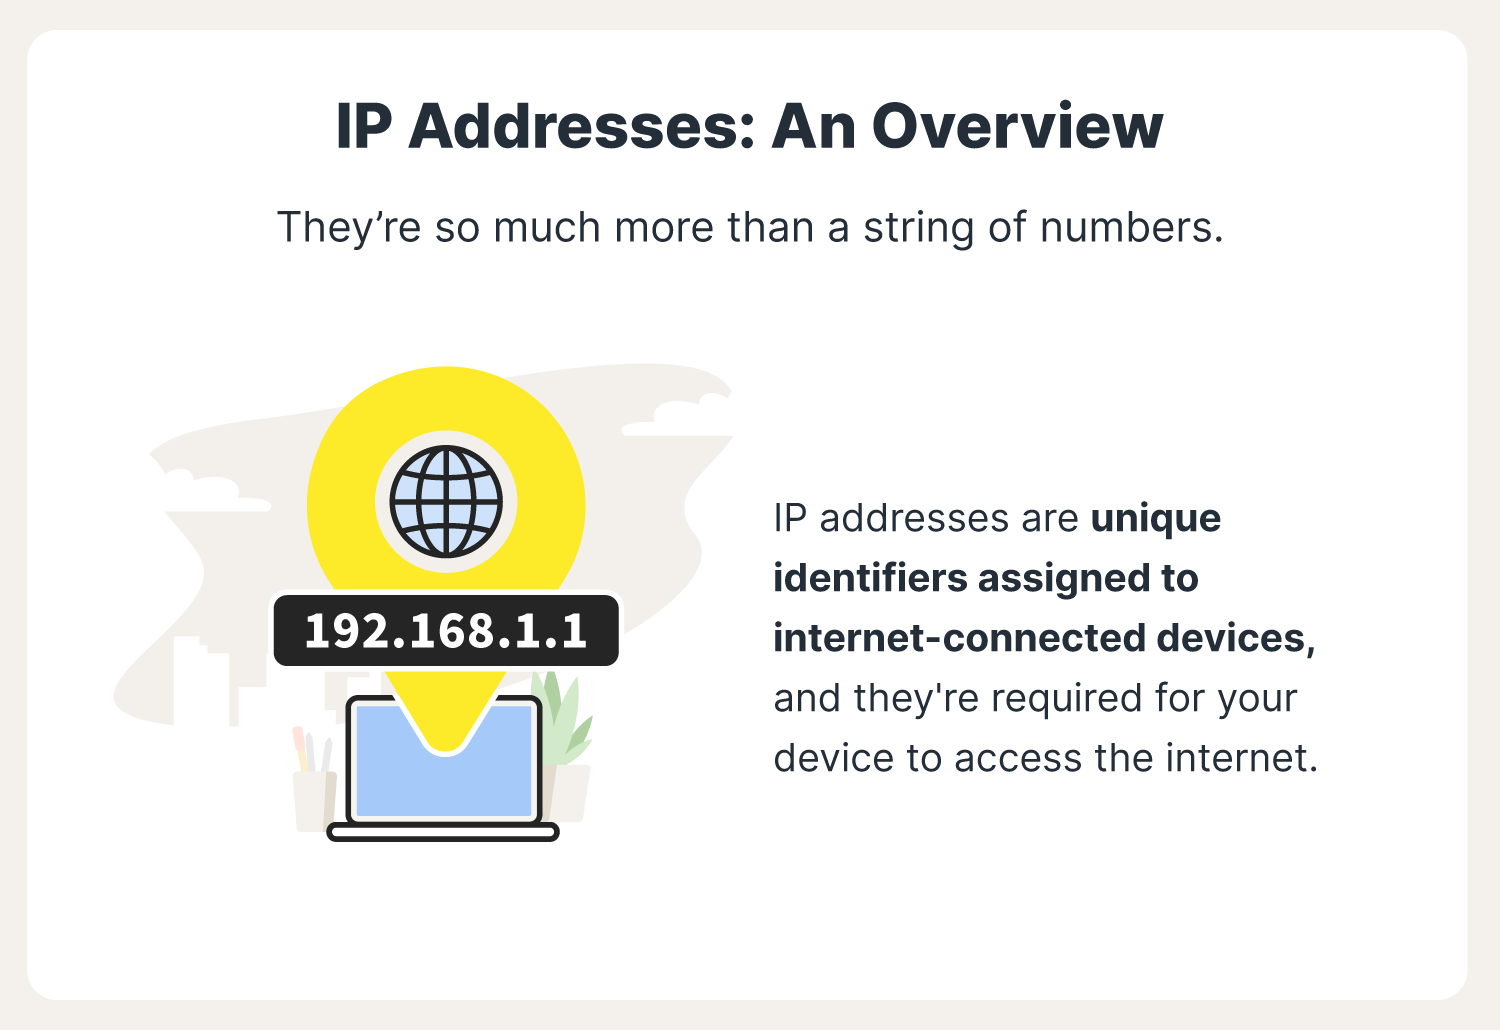 an IP address is written across a geolocation marking, indicating IP addresses reveal online users’ geolocation